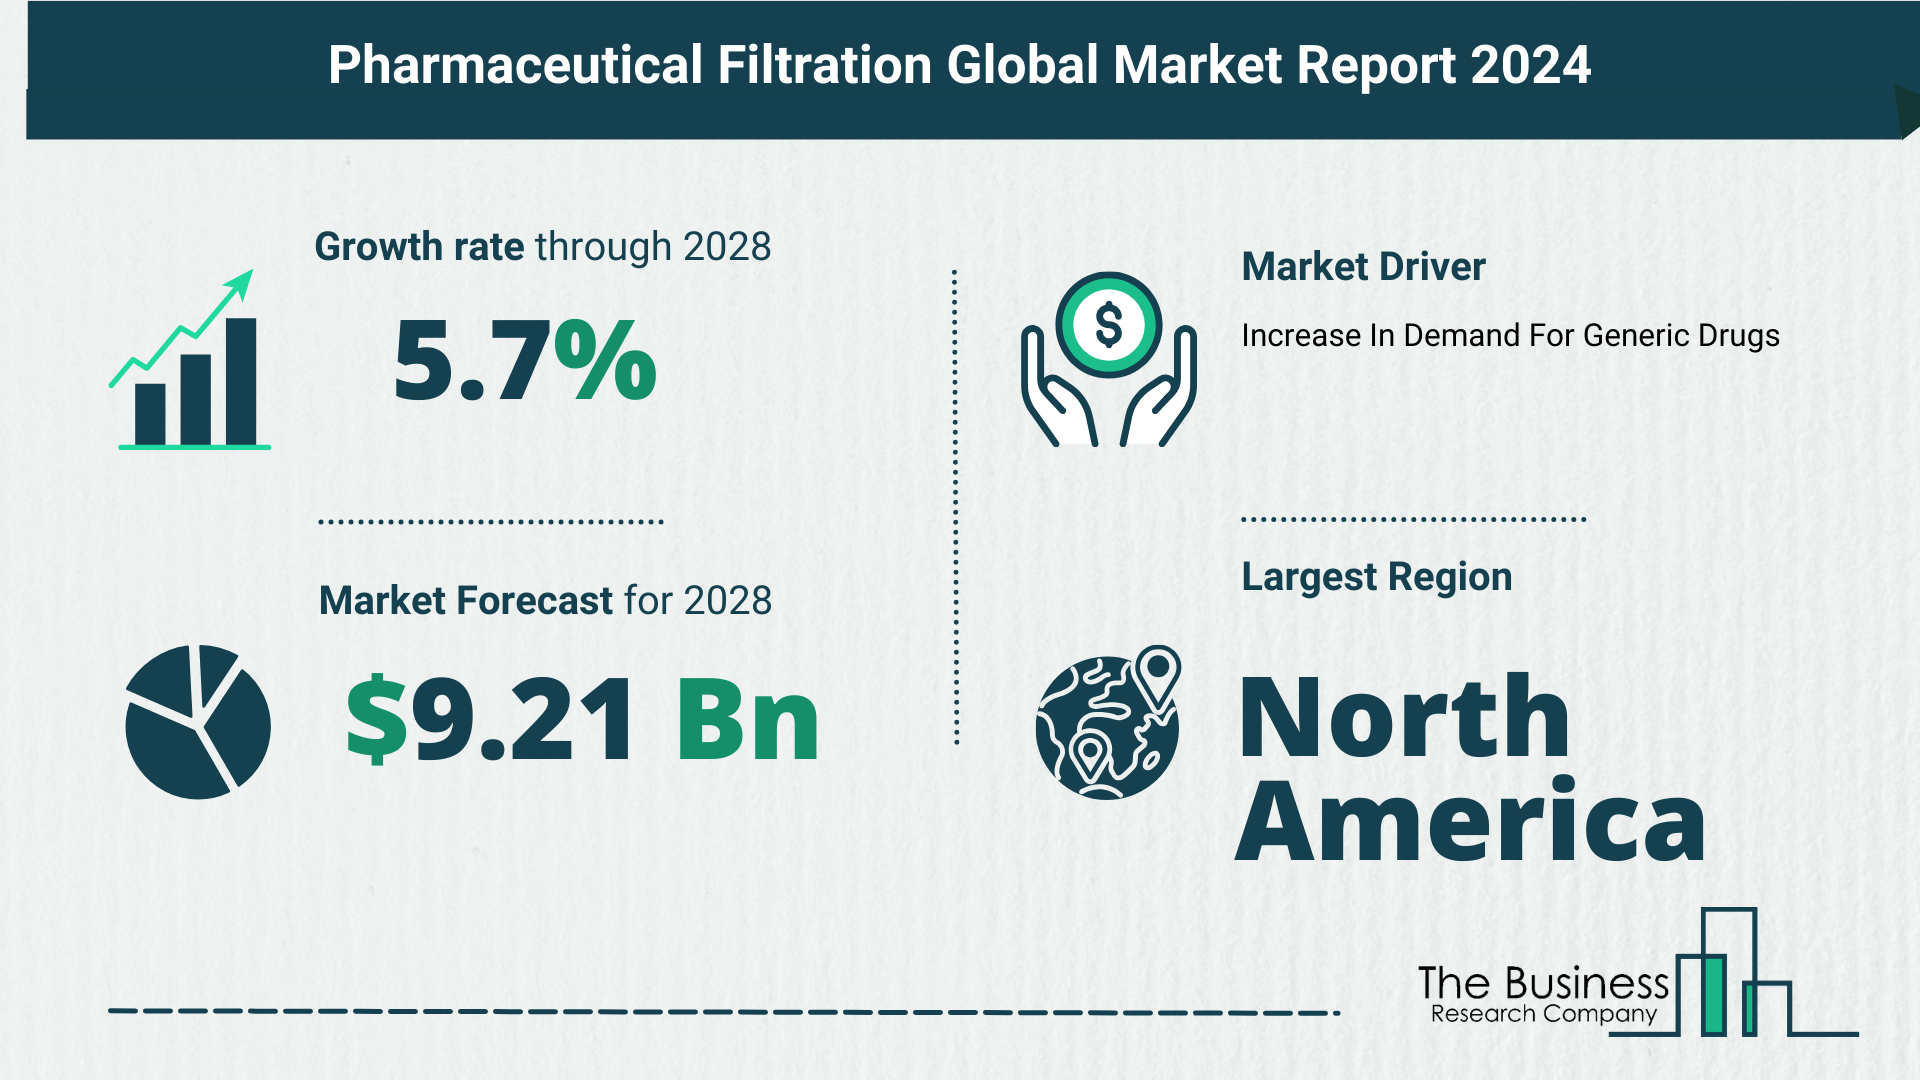 Key Trends And Drivers In The Pharmaceutical Filtration Market 2024